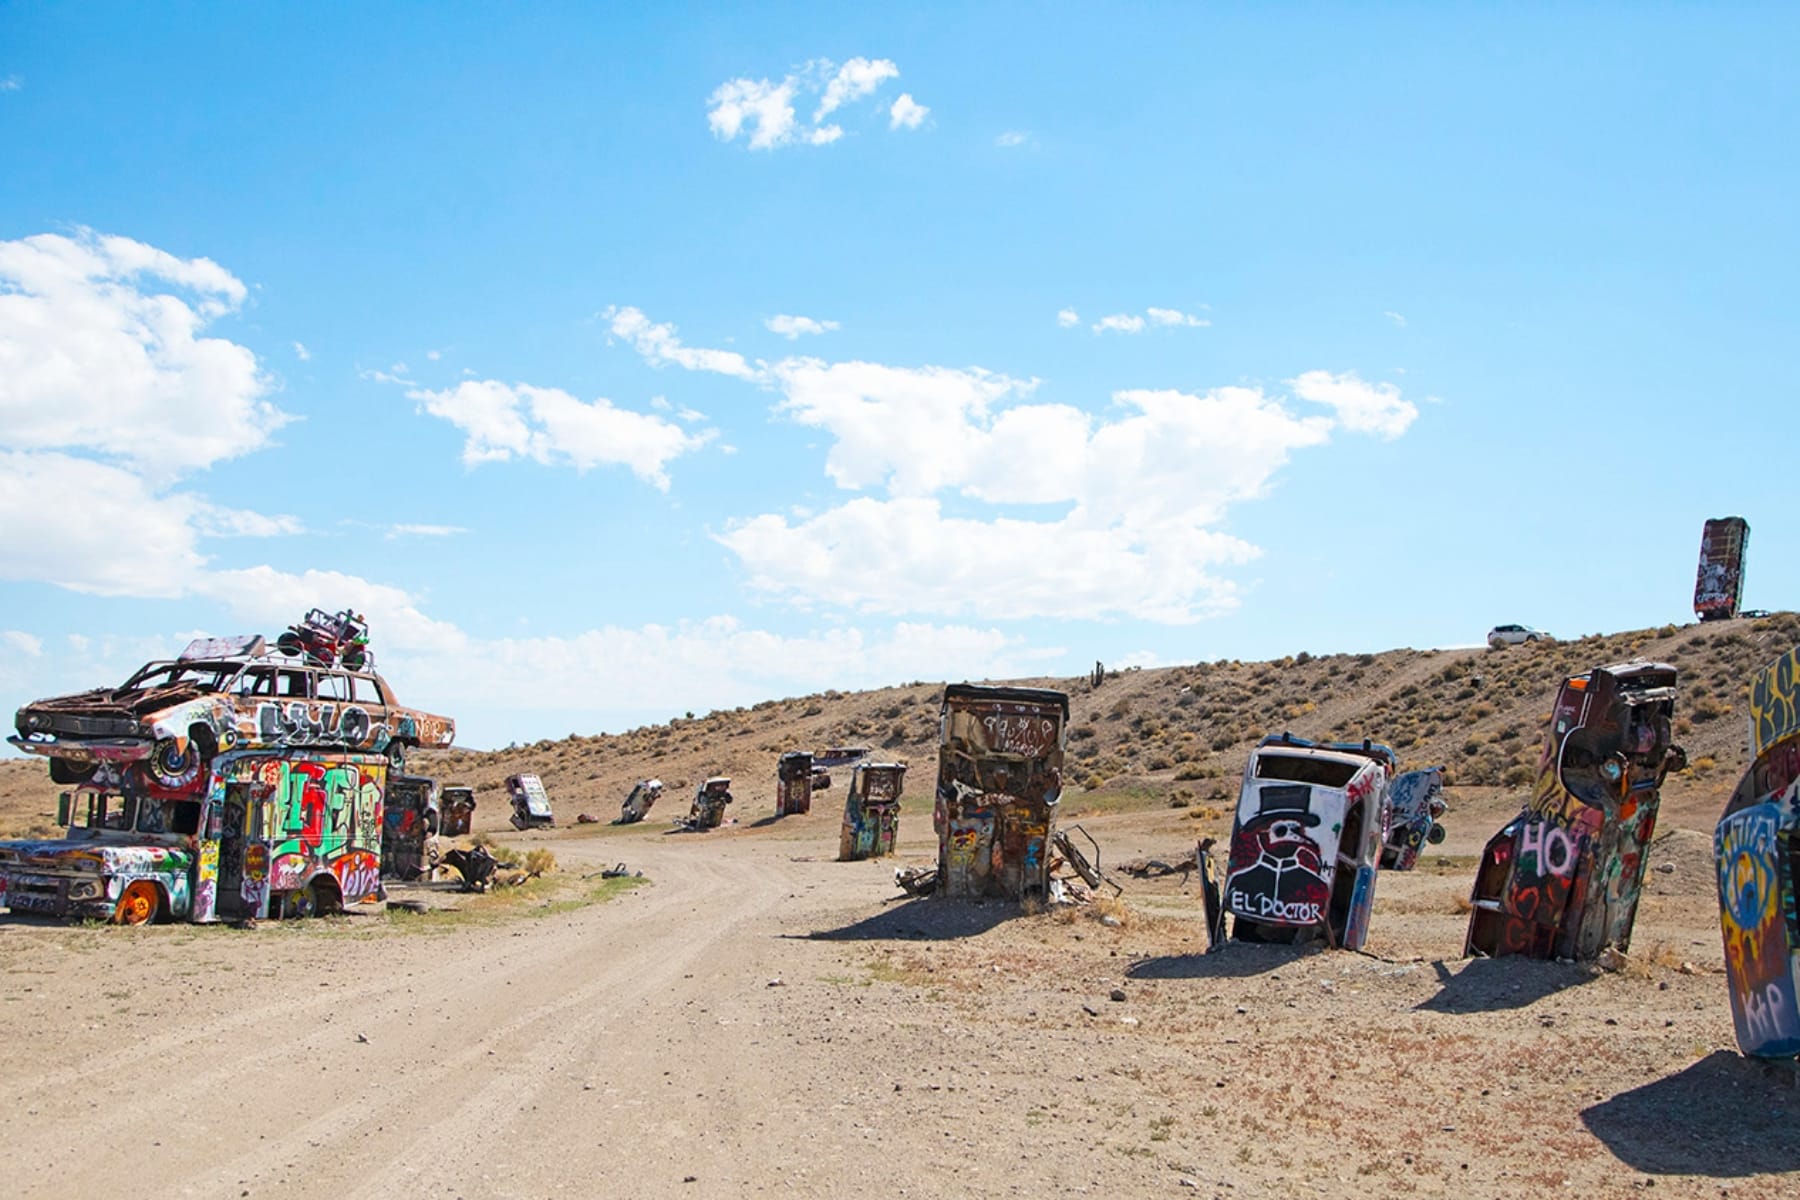 International car forest in Goldfield Nevada, a suggested stop on the dark sky park road trip